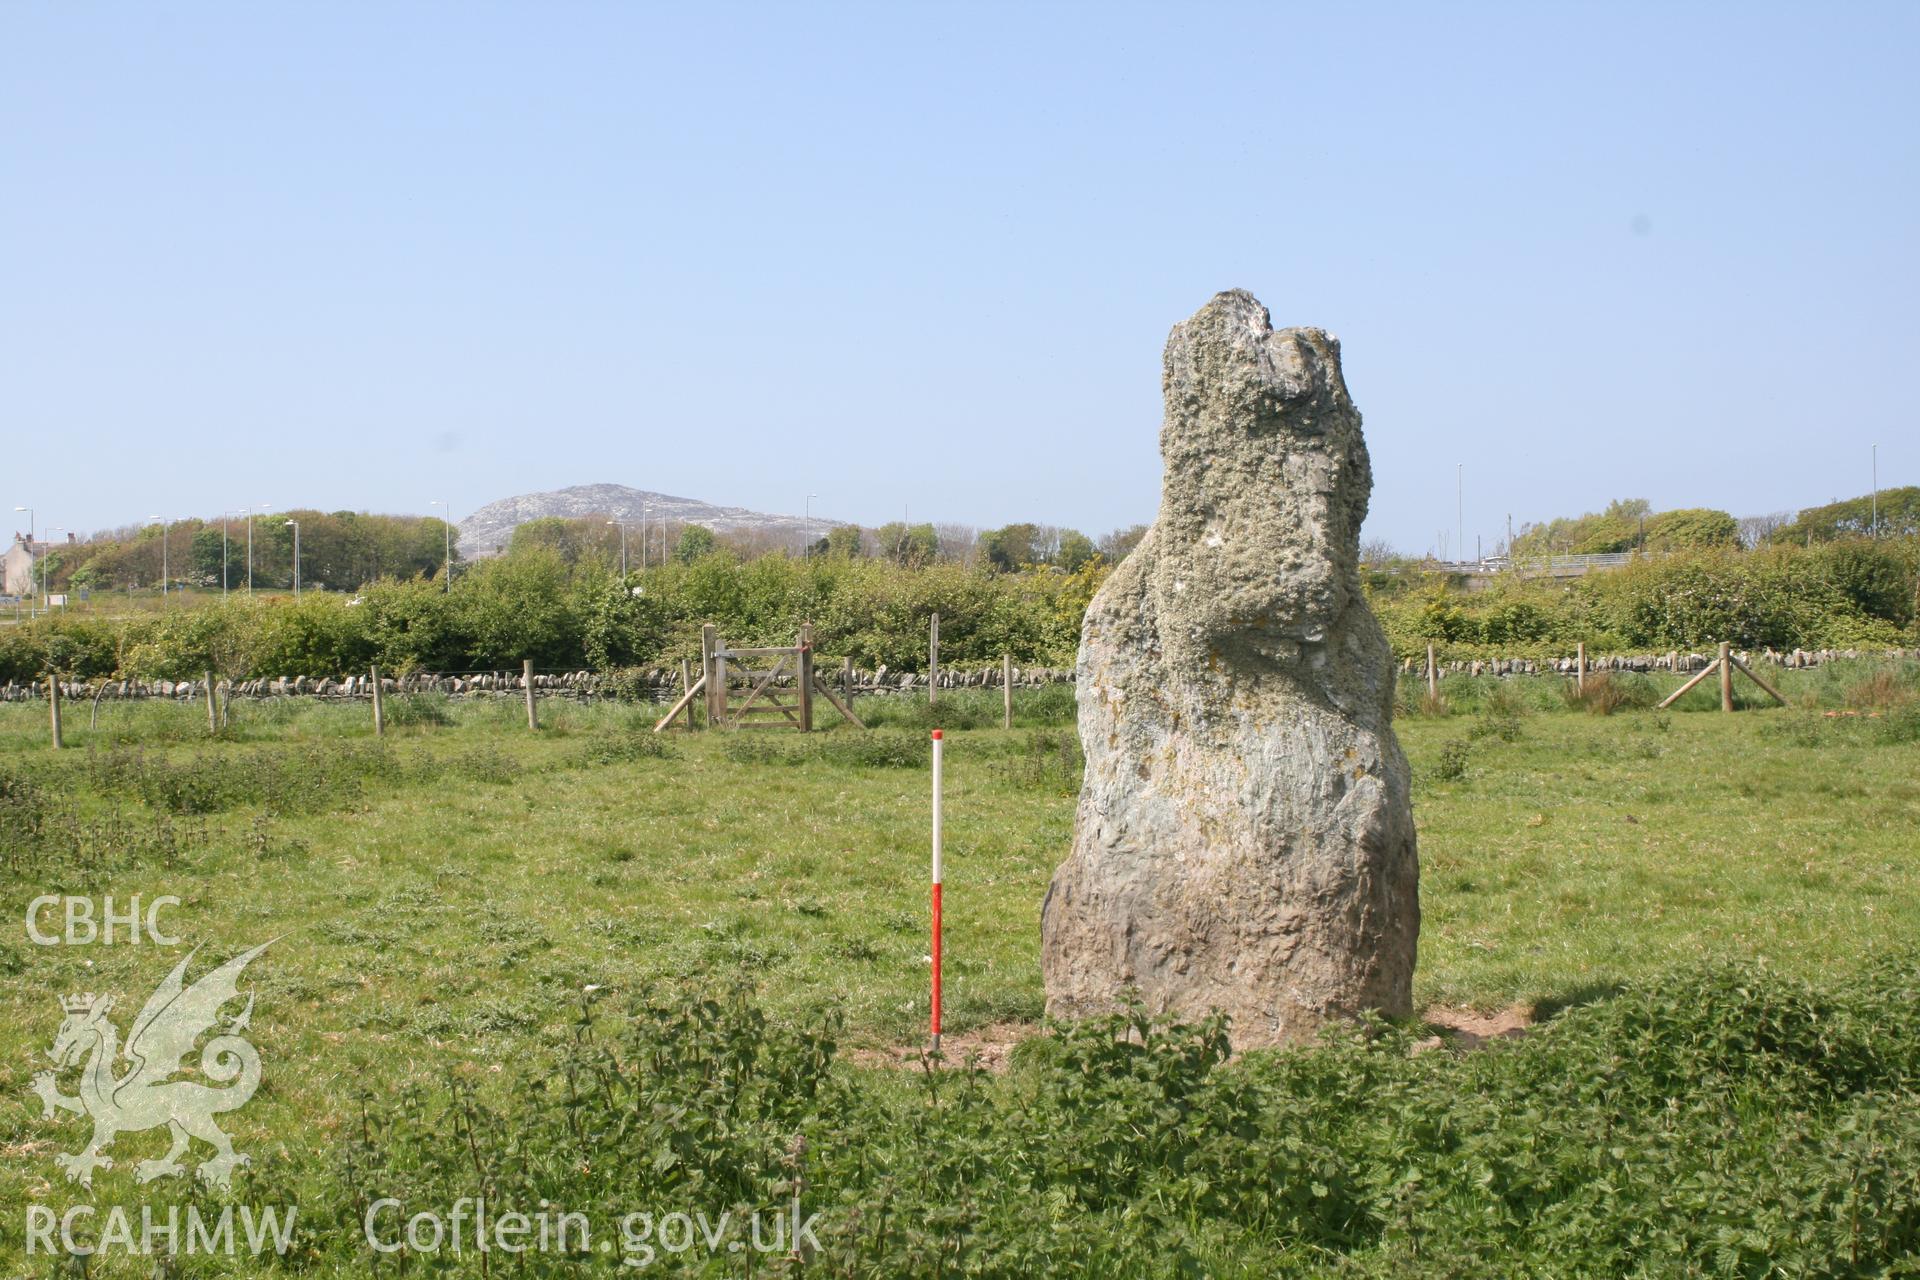 View of Ty-Mawr Standing Stone, from the northwest. Looking across the Parc Cybi Enterprise Zone. Digital photograph taken as part of archaeological work at Parc Cybi Enterprise Zone, Holyhead, carried out by Archaeology Wales, 2017. Project no: P2522.